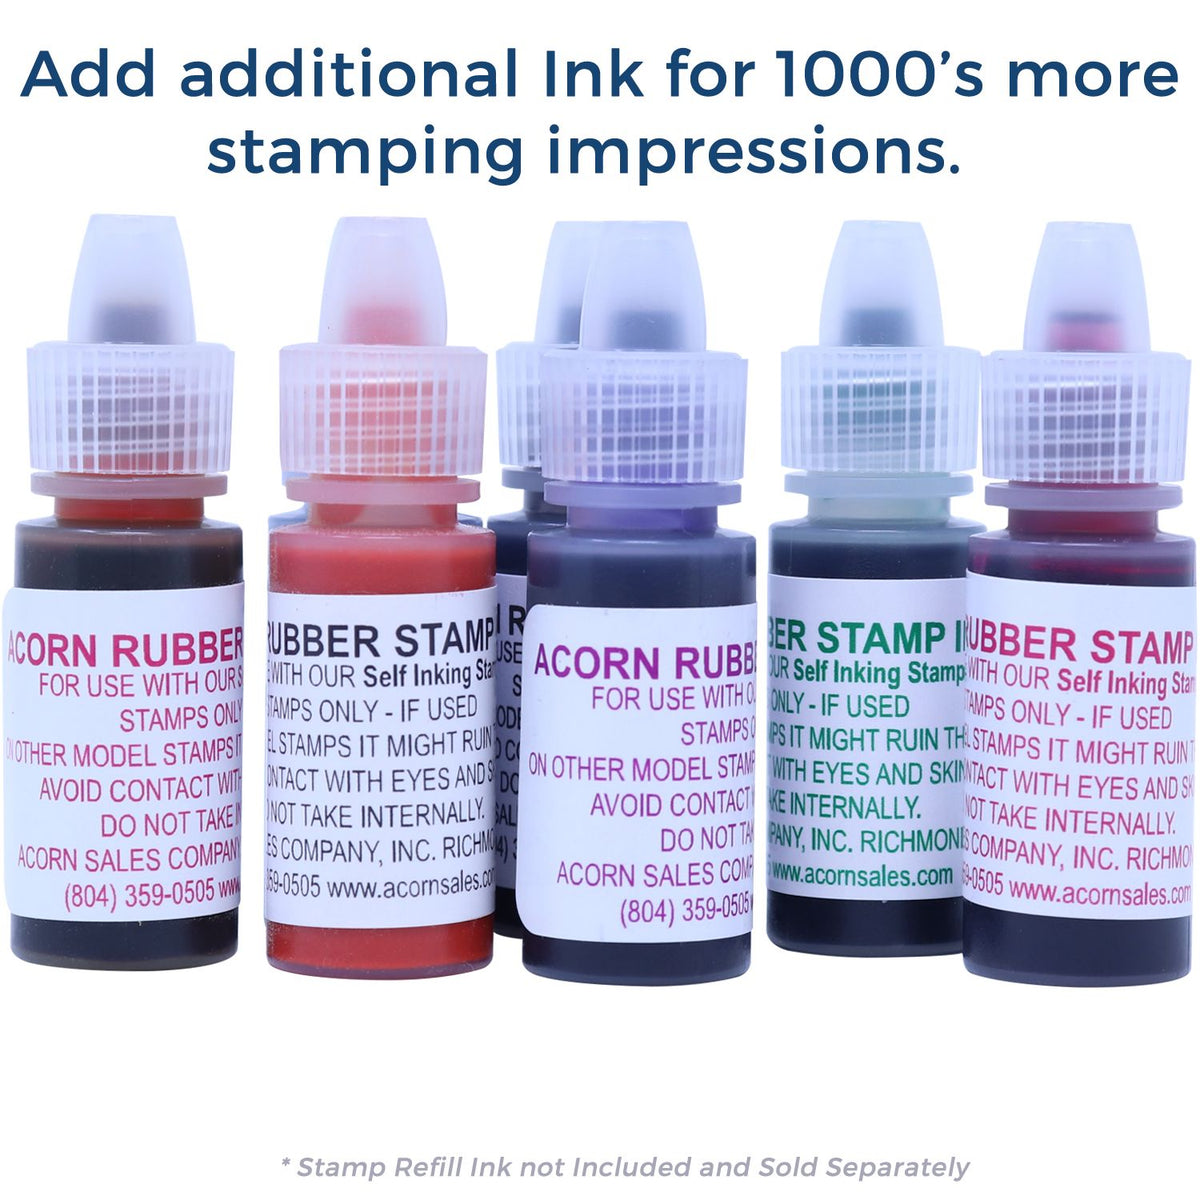 Refill Ink for Self-Inking Round OK Stamp Available